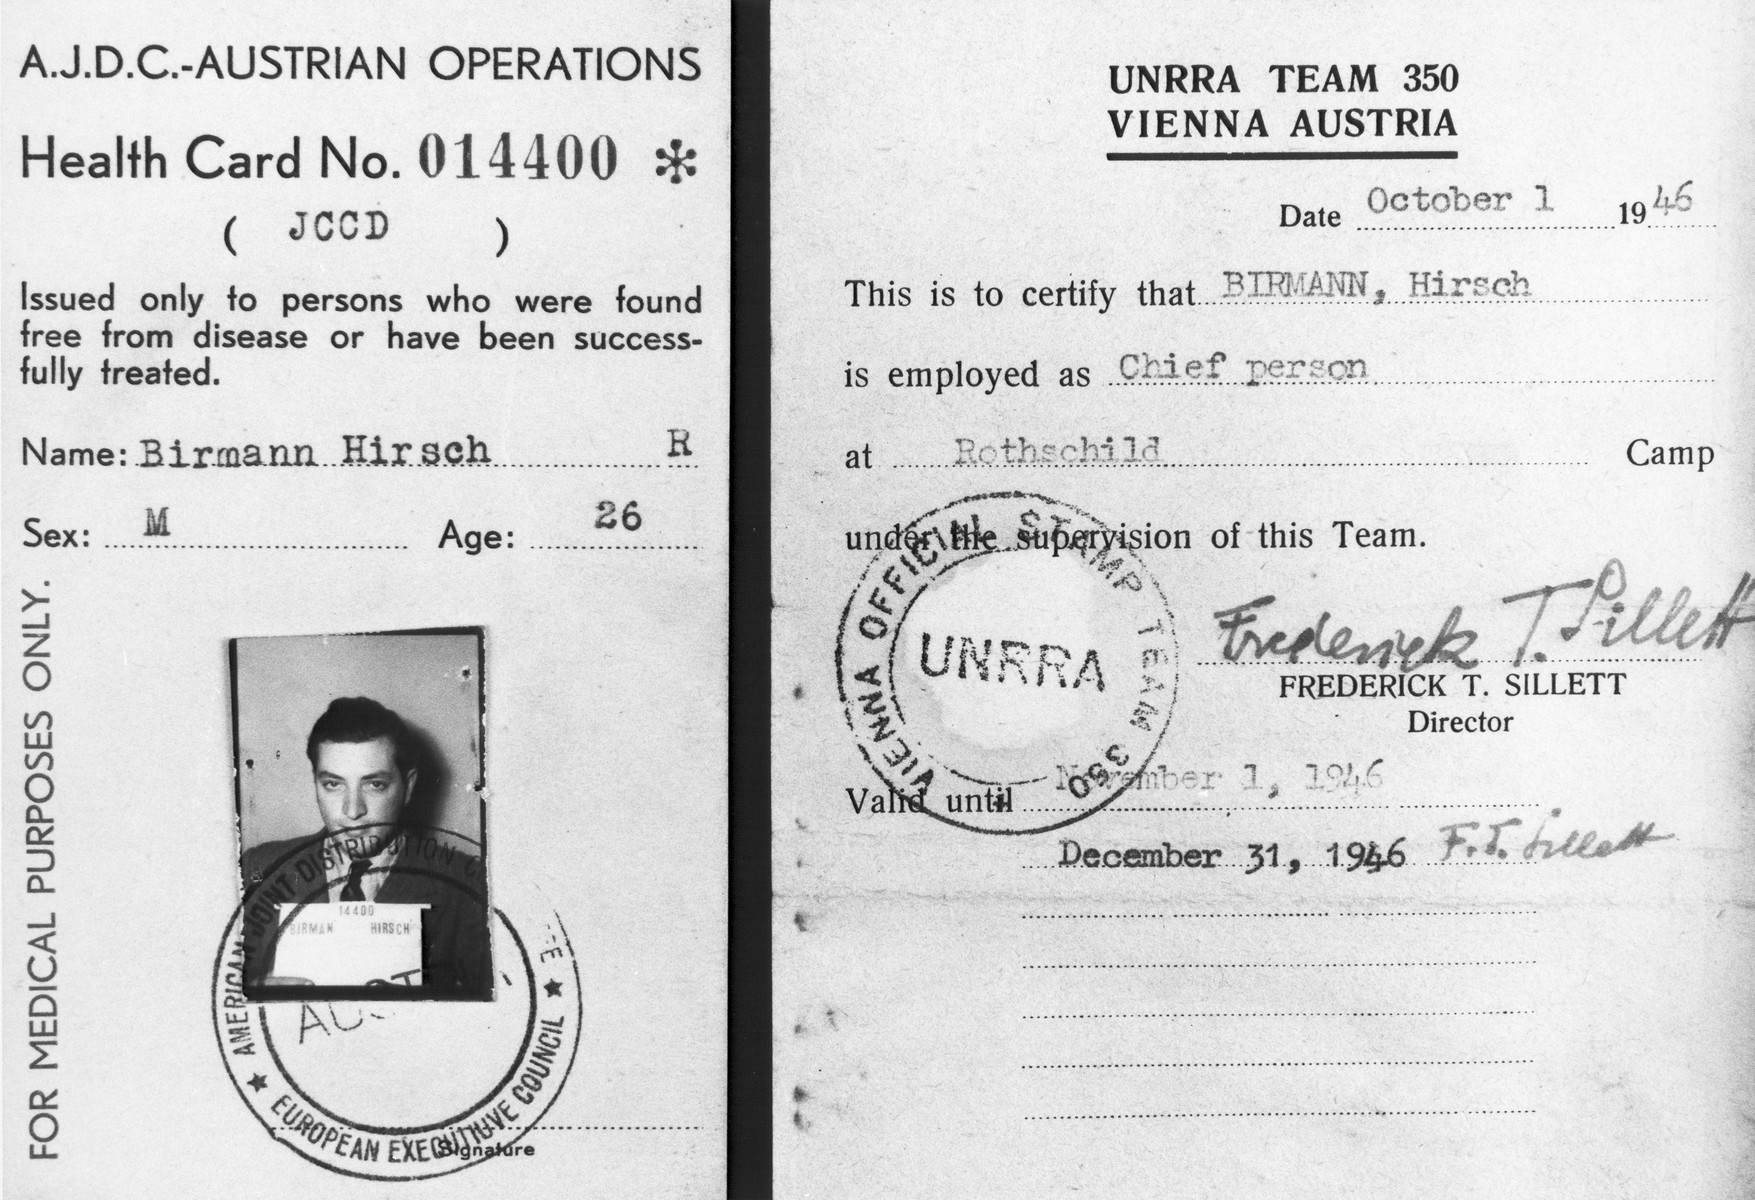 Health card issued by the American Joint Distribution Committee Austrian Operations to Jewish DP Hirsch Birman certifying that he is an employee of the Rothschild Hospital displaced persons camp in Vienna, under the supervision of UNRRA team 350.